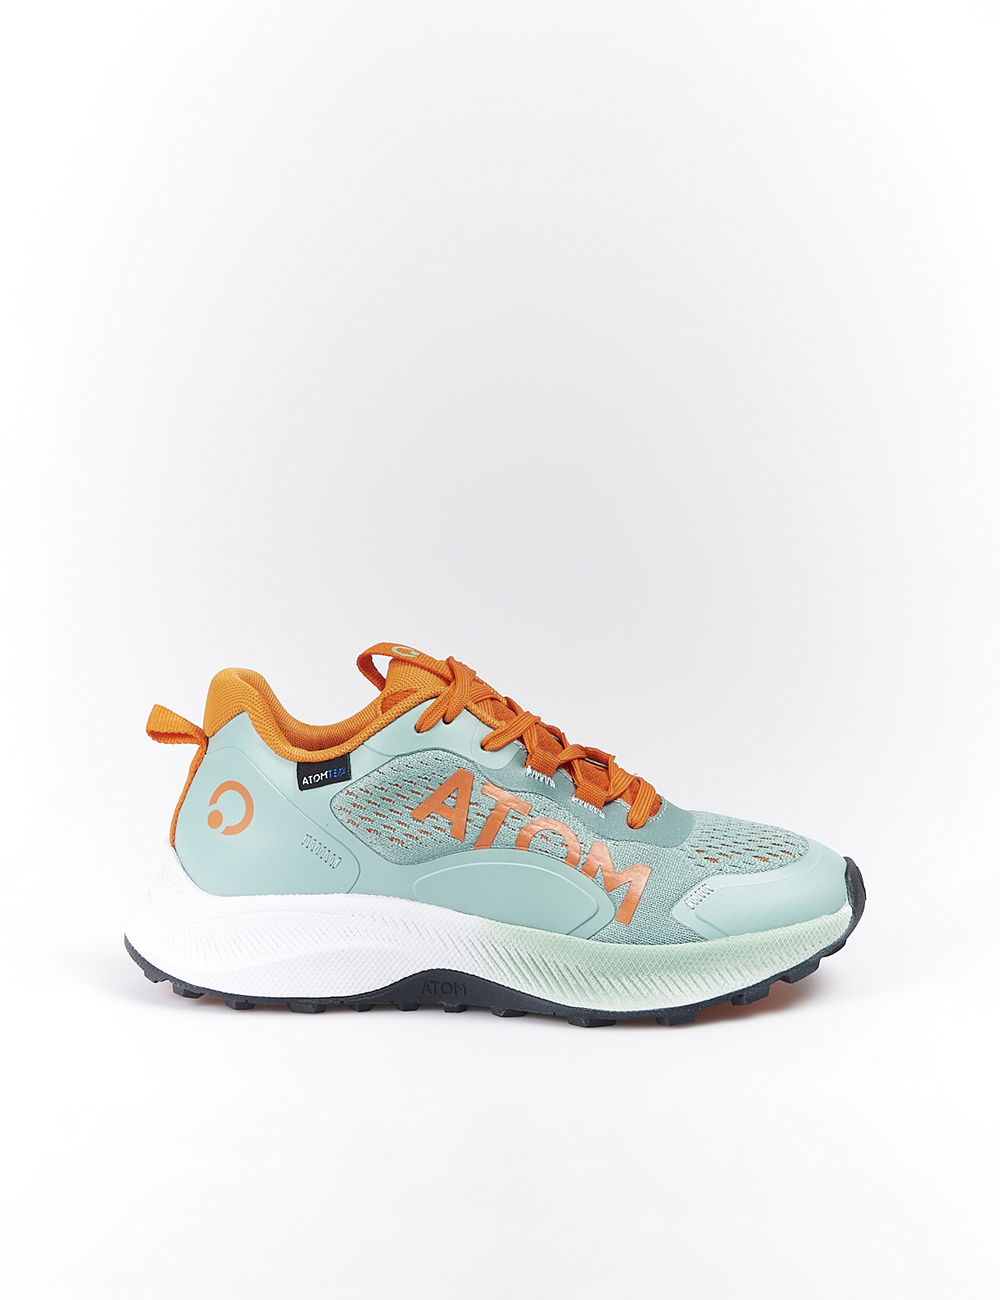 https://resize.sprintercdn.com/o/products/65857267aeef4e059b246d3c9844aace/zapatos-deportivos-atom-by-fluchos-at114_65857267aeef4e059b246d3c9844aace_1828517270.jpg